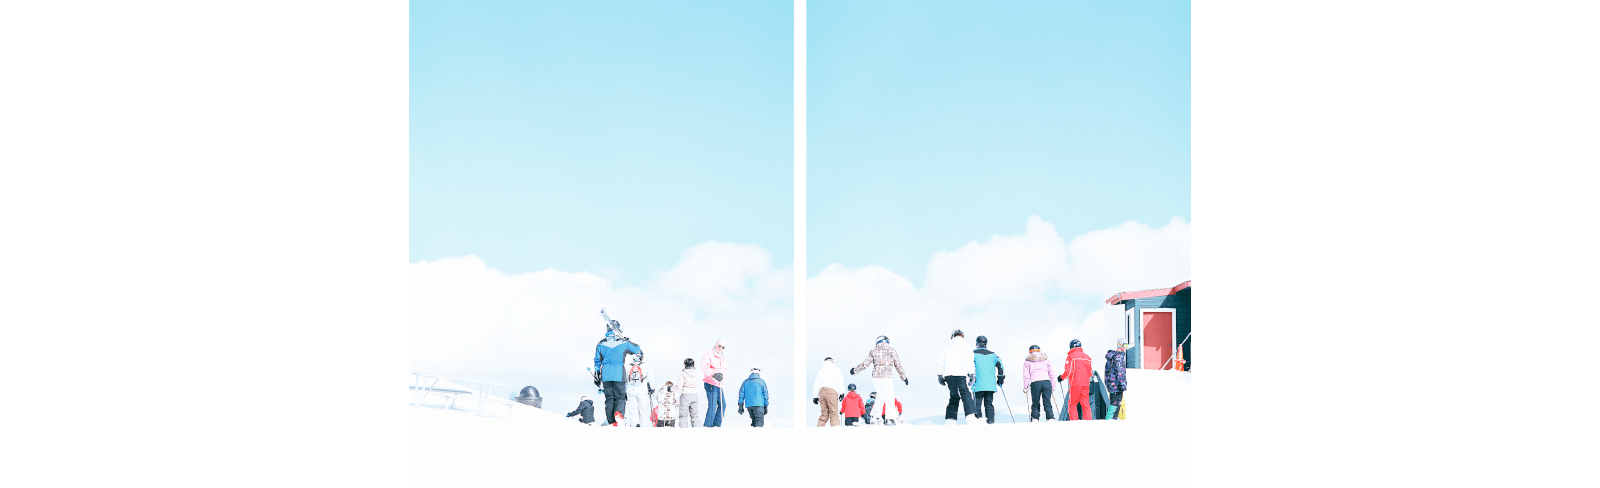 a group of people on snow